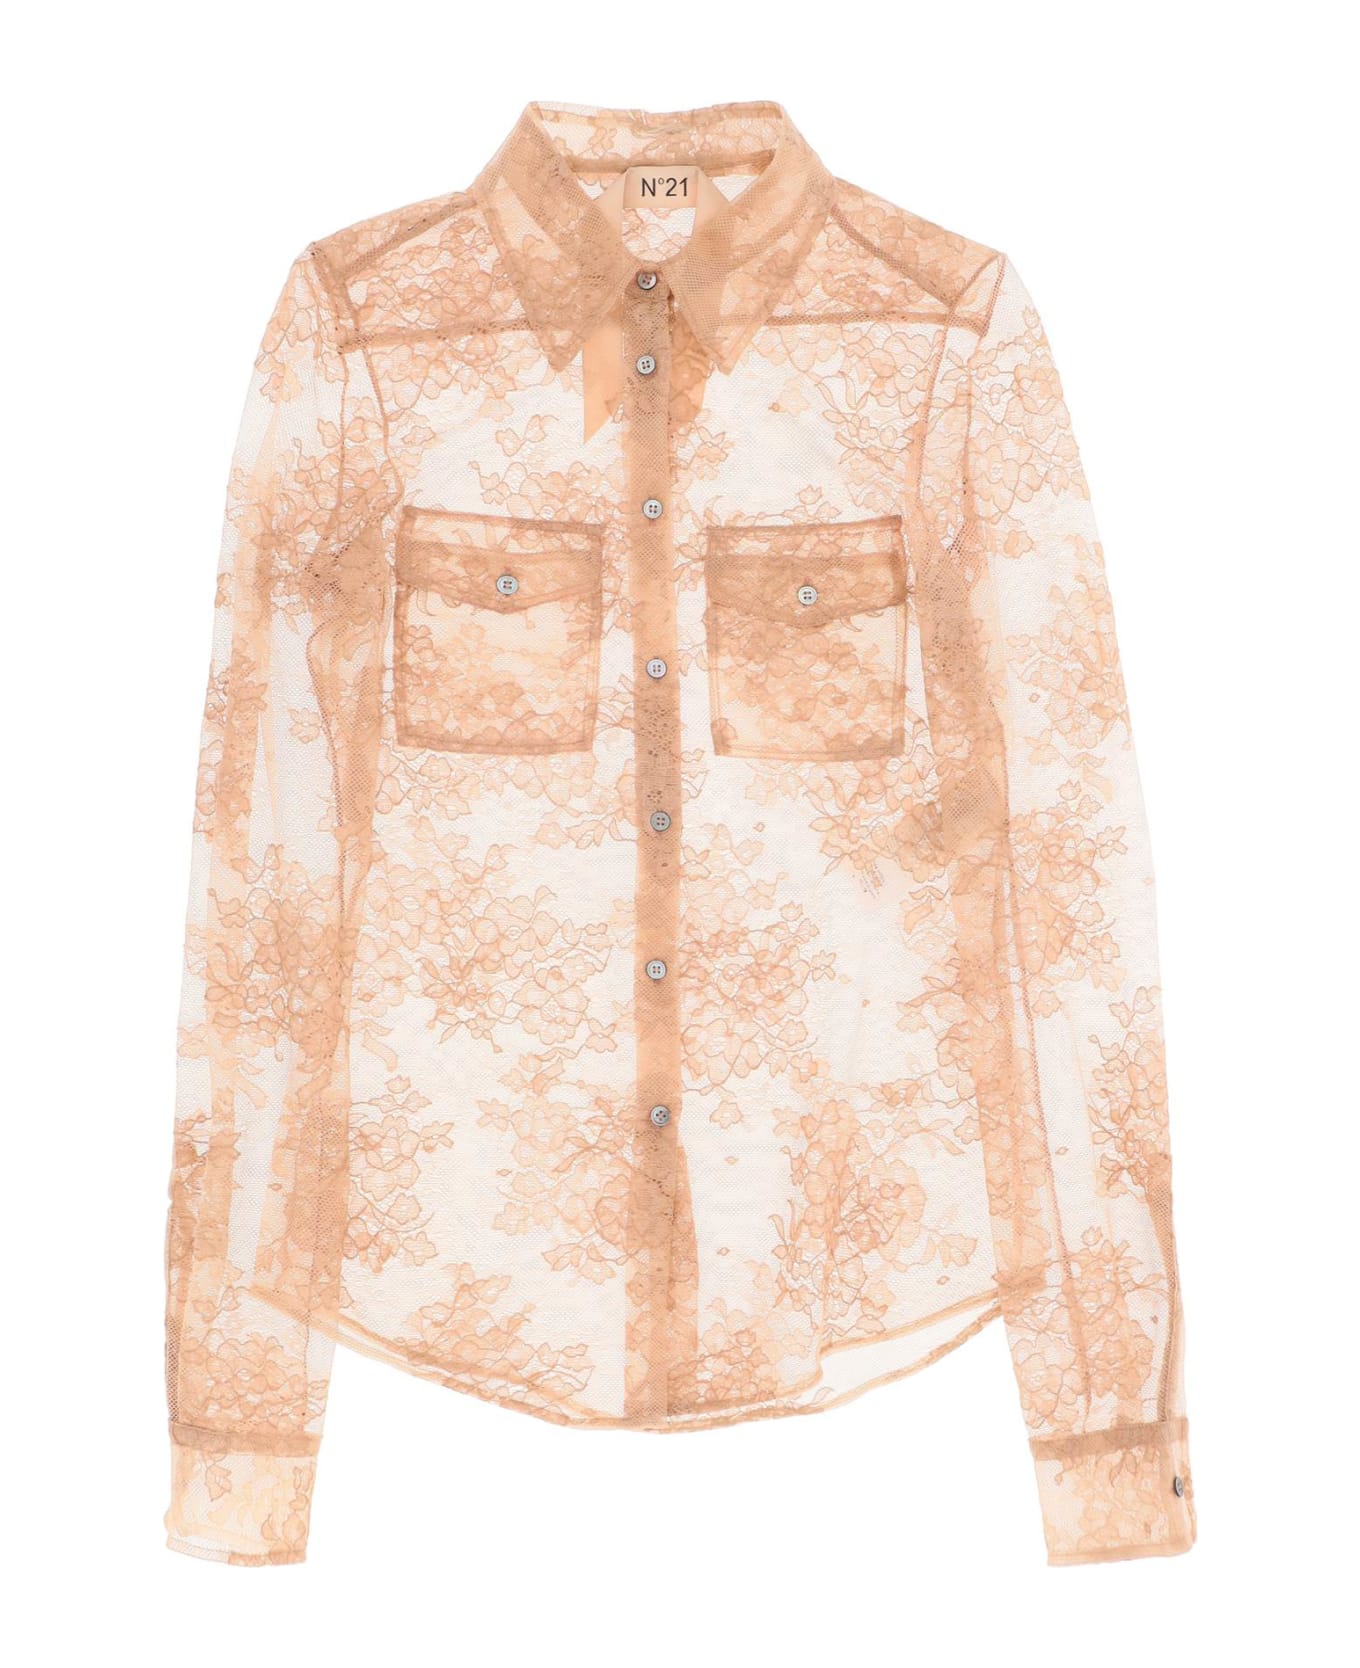 N.21 Lace Shirt - CEROTTO (Pink) シャツ